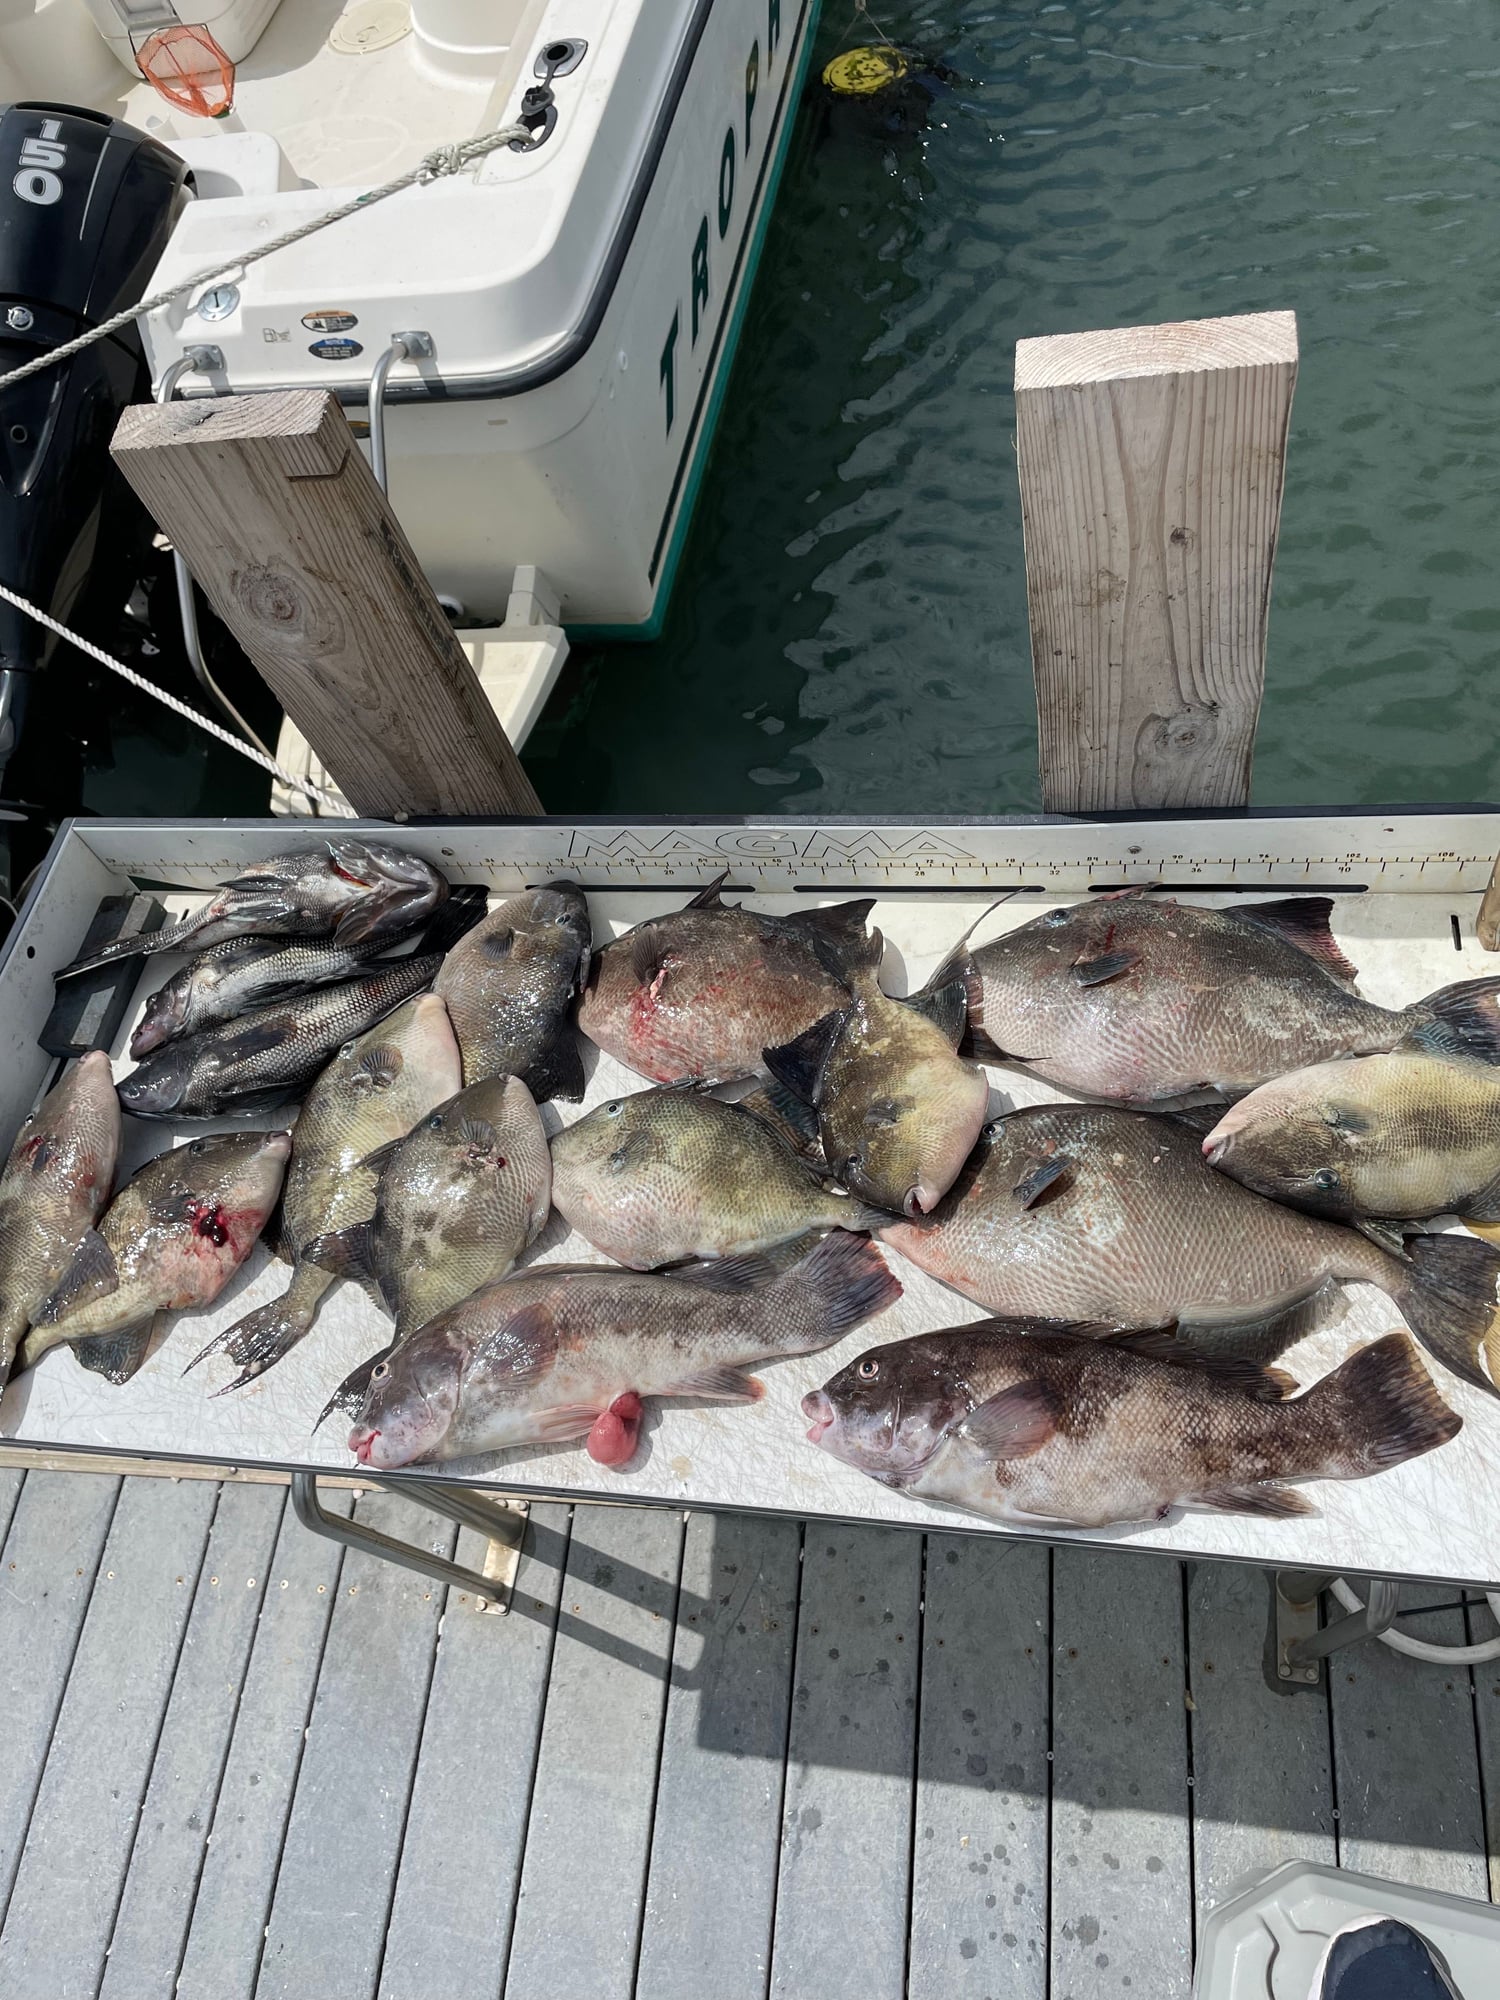 Chumming bottom fish in deeper spots - The Hull Truth - Boating and Fishing  Forum